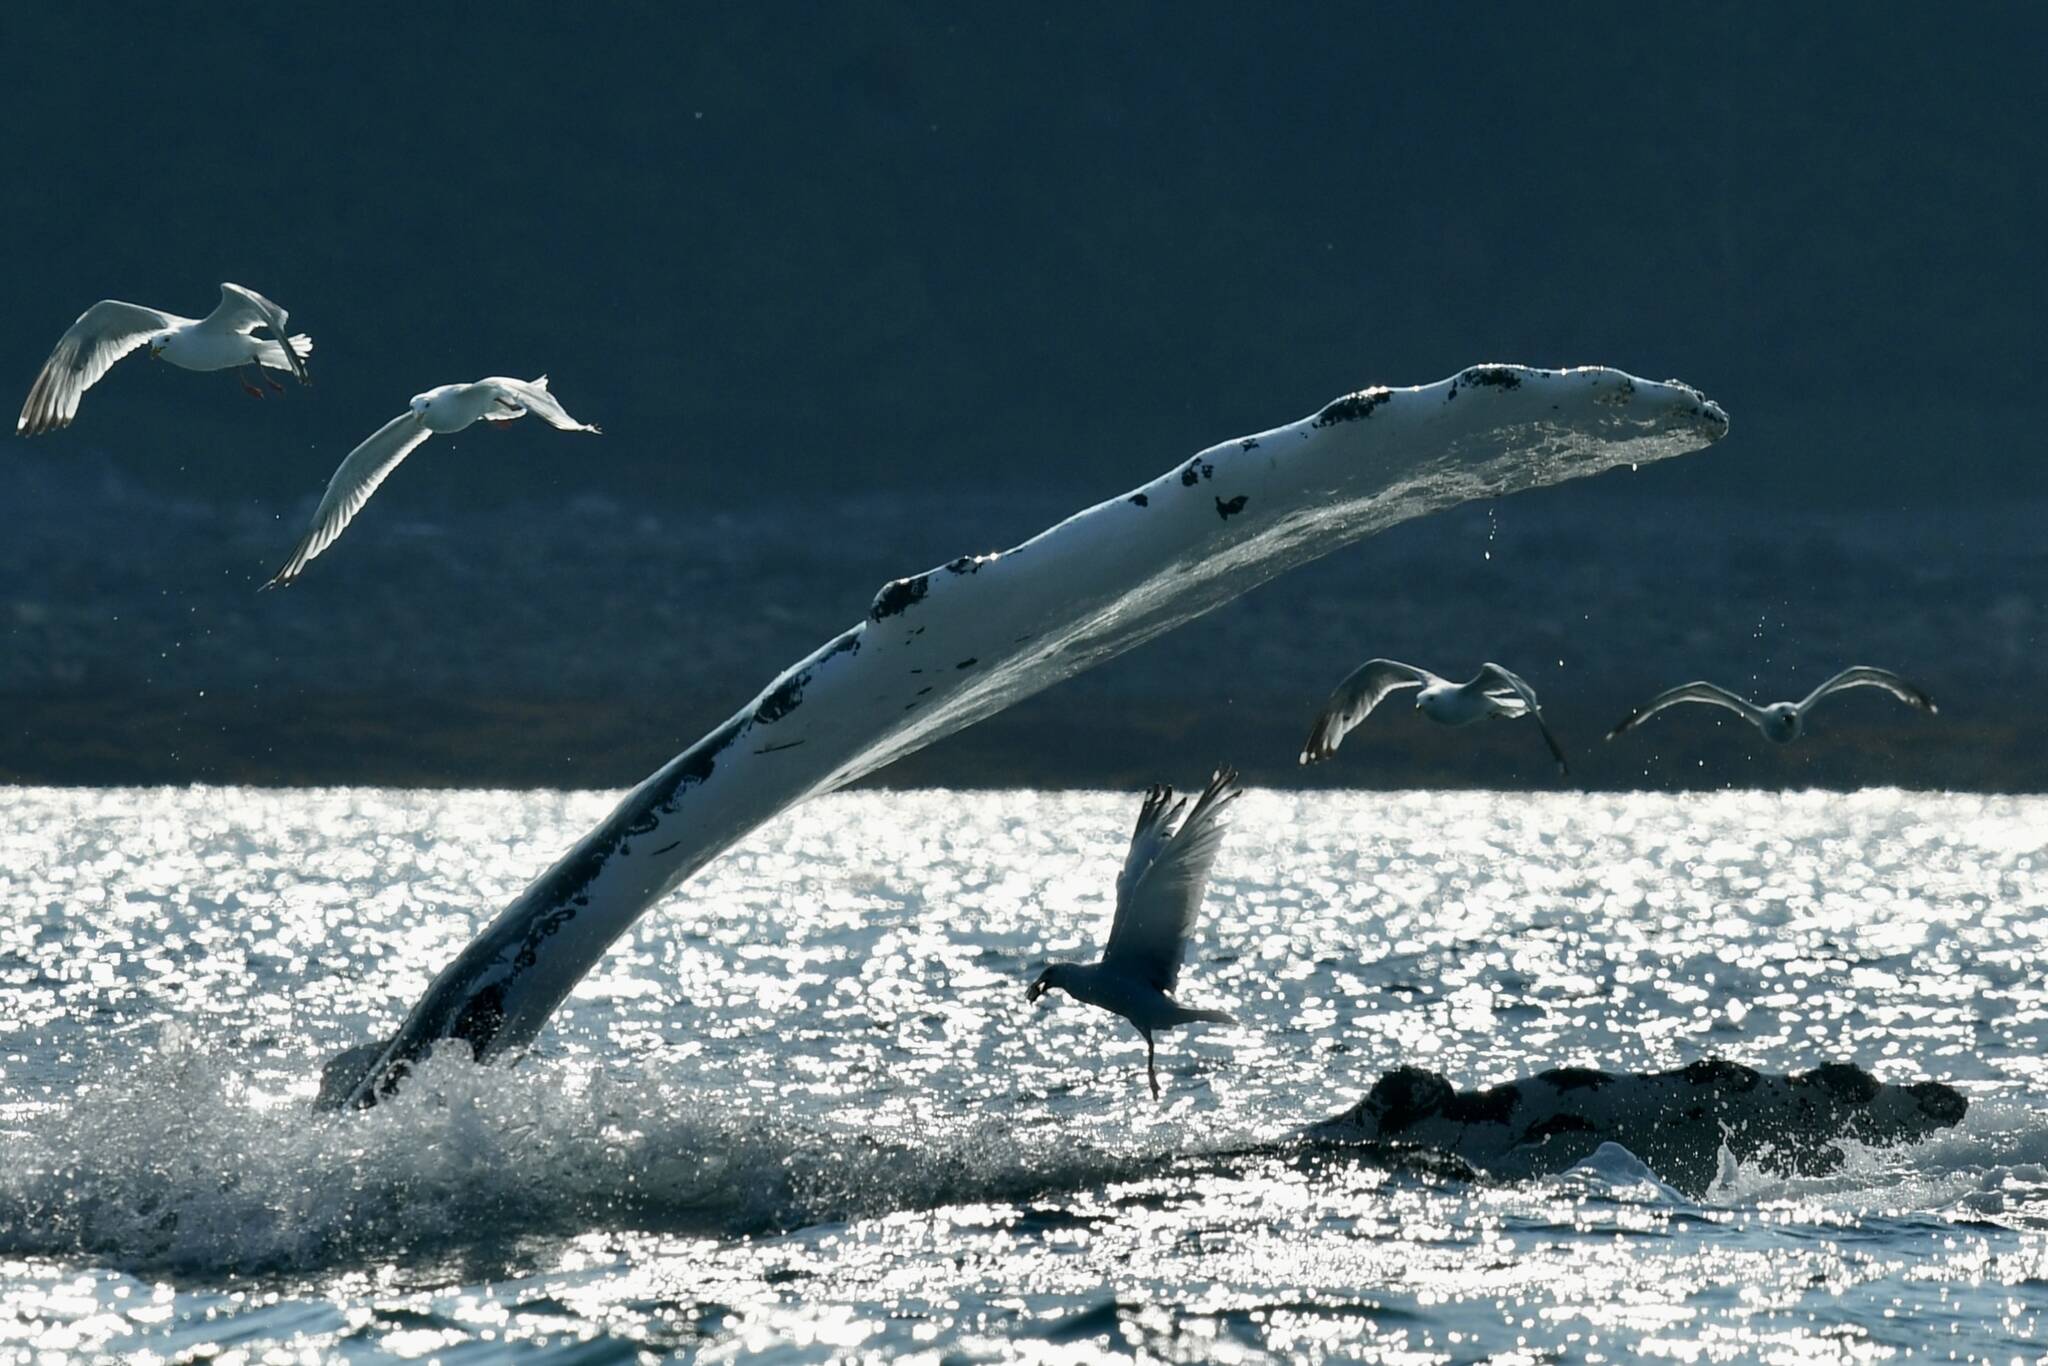 Seabirds hover above a humpback whale near Juneau on July 31. (Photo by Christopher Grau)